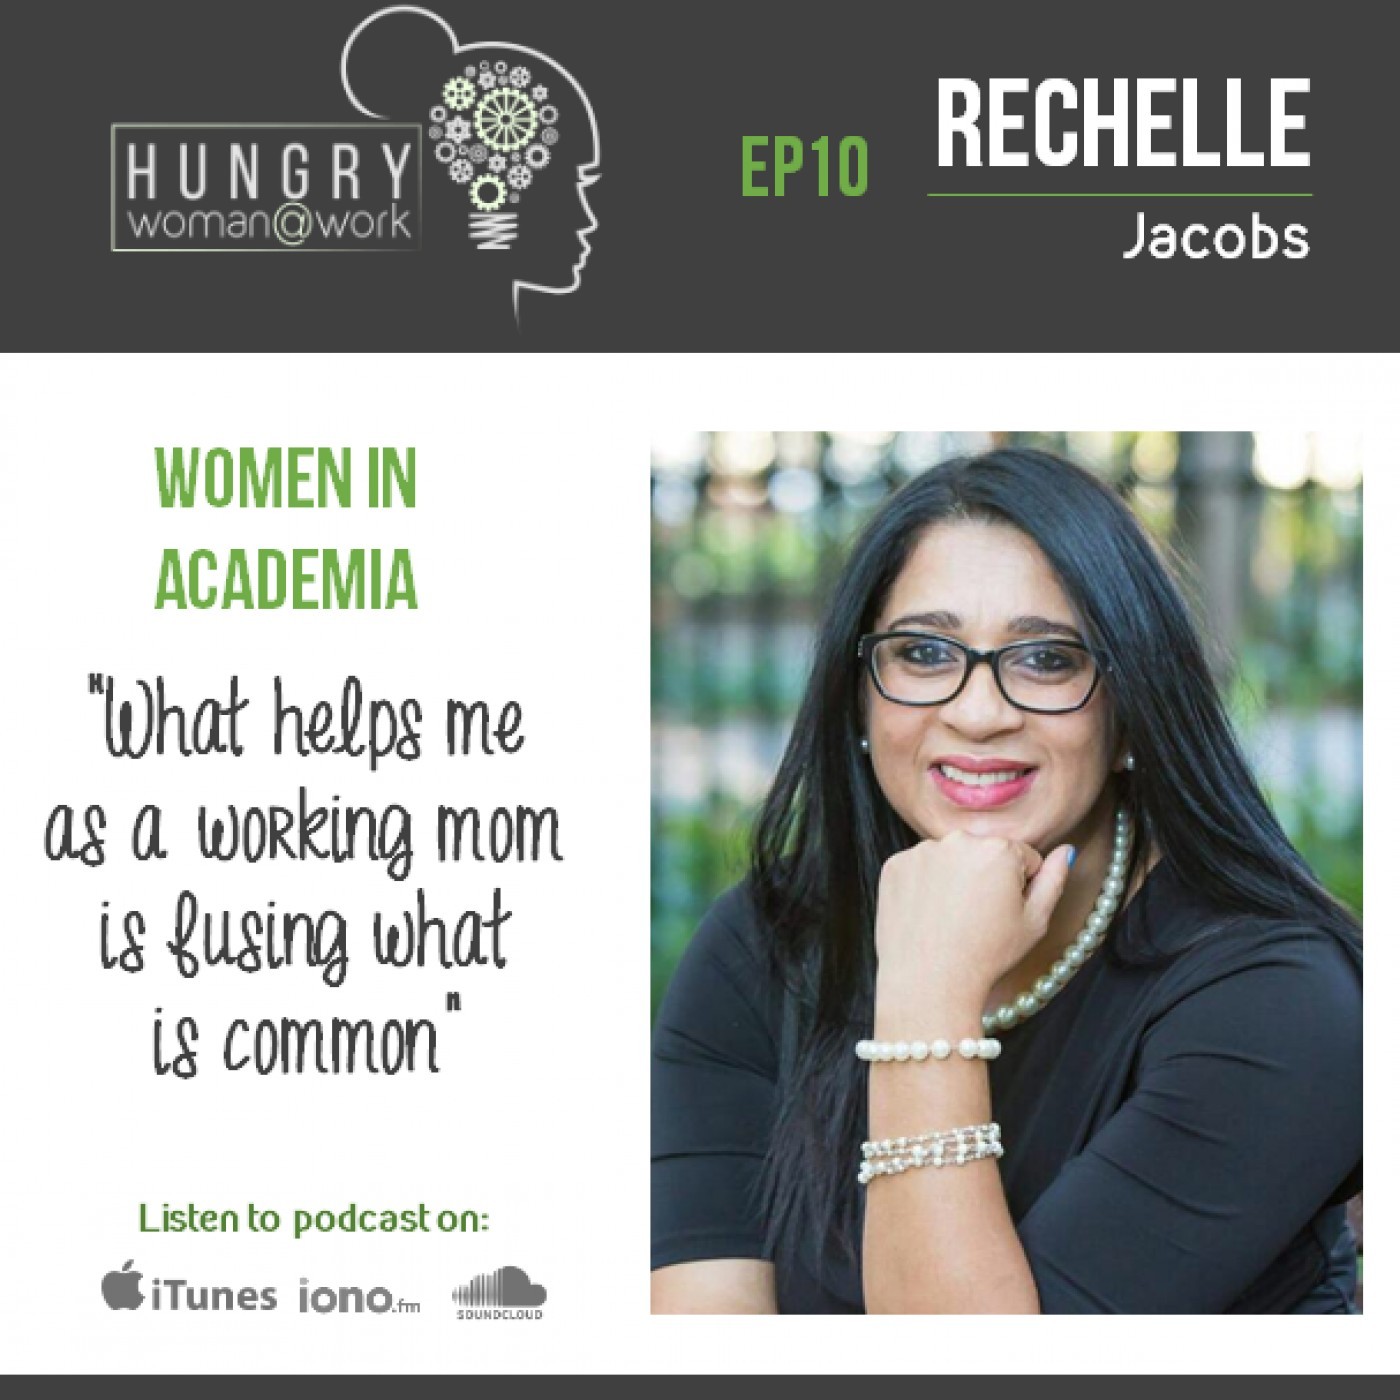 Ep 10: “What helps me as a working mom is fusing what is common” - Rechelle Jacobs